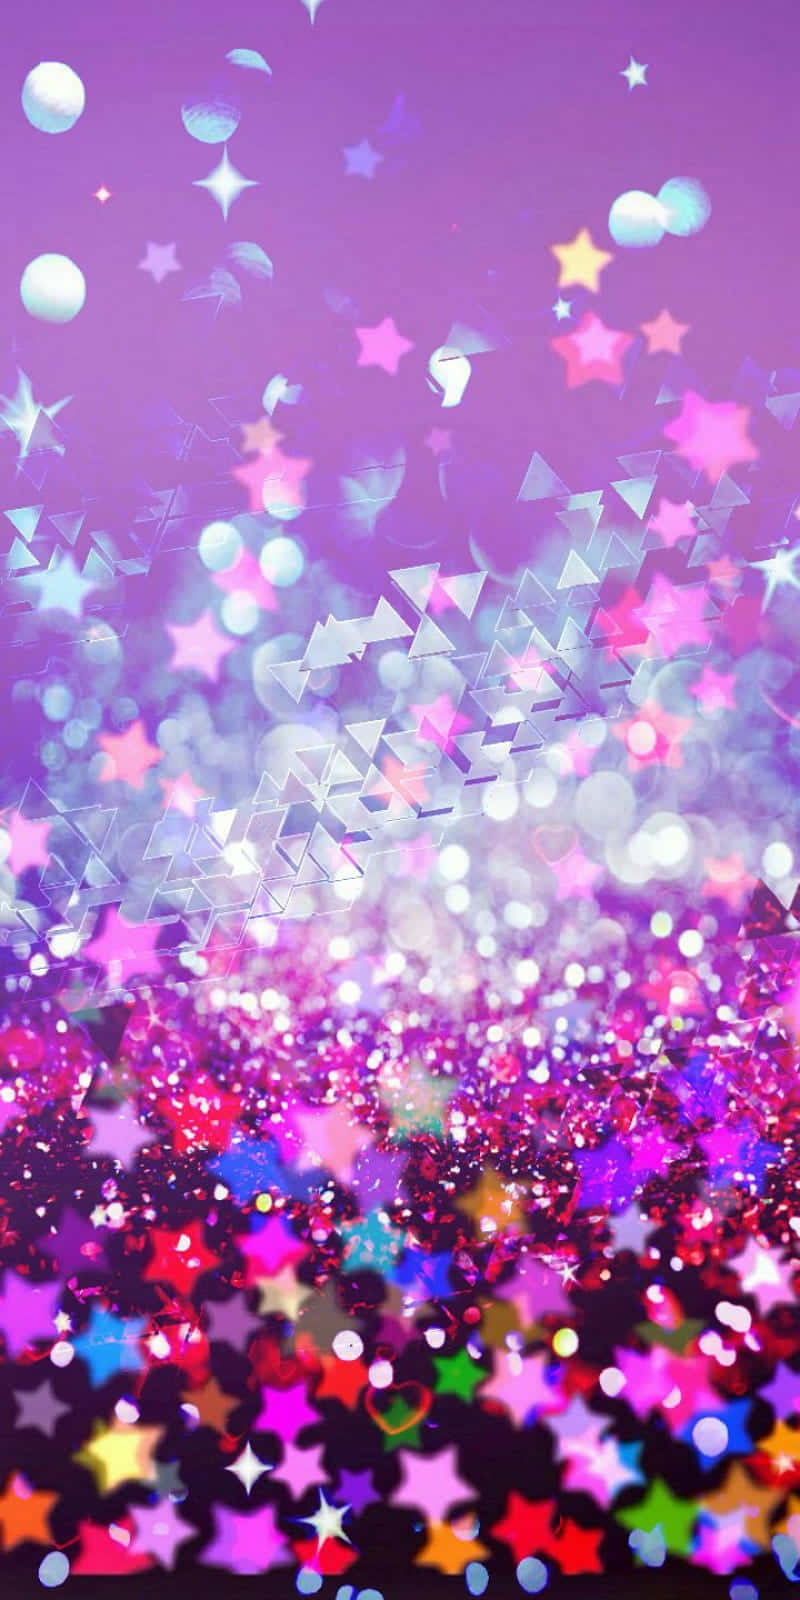 Abstract pink sparkly background